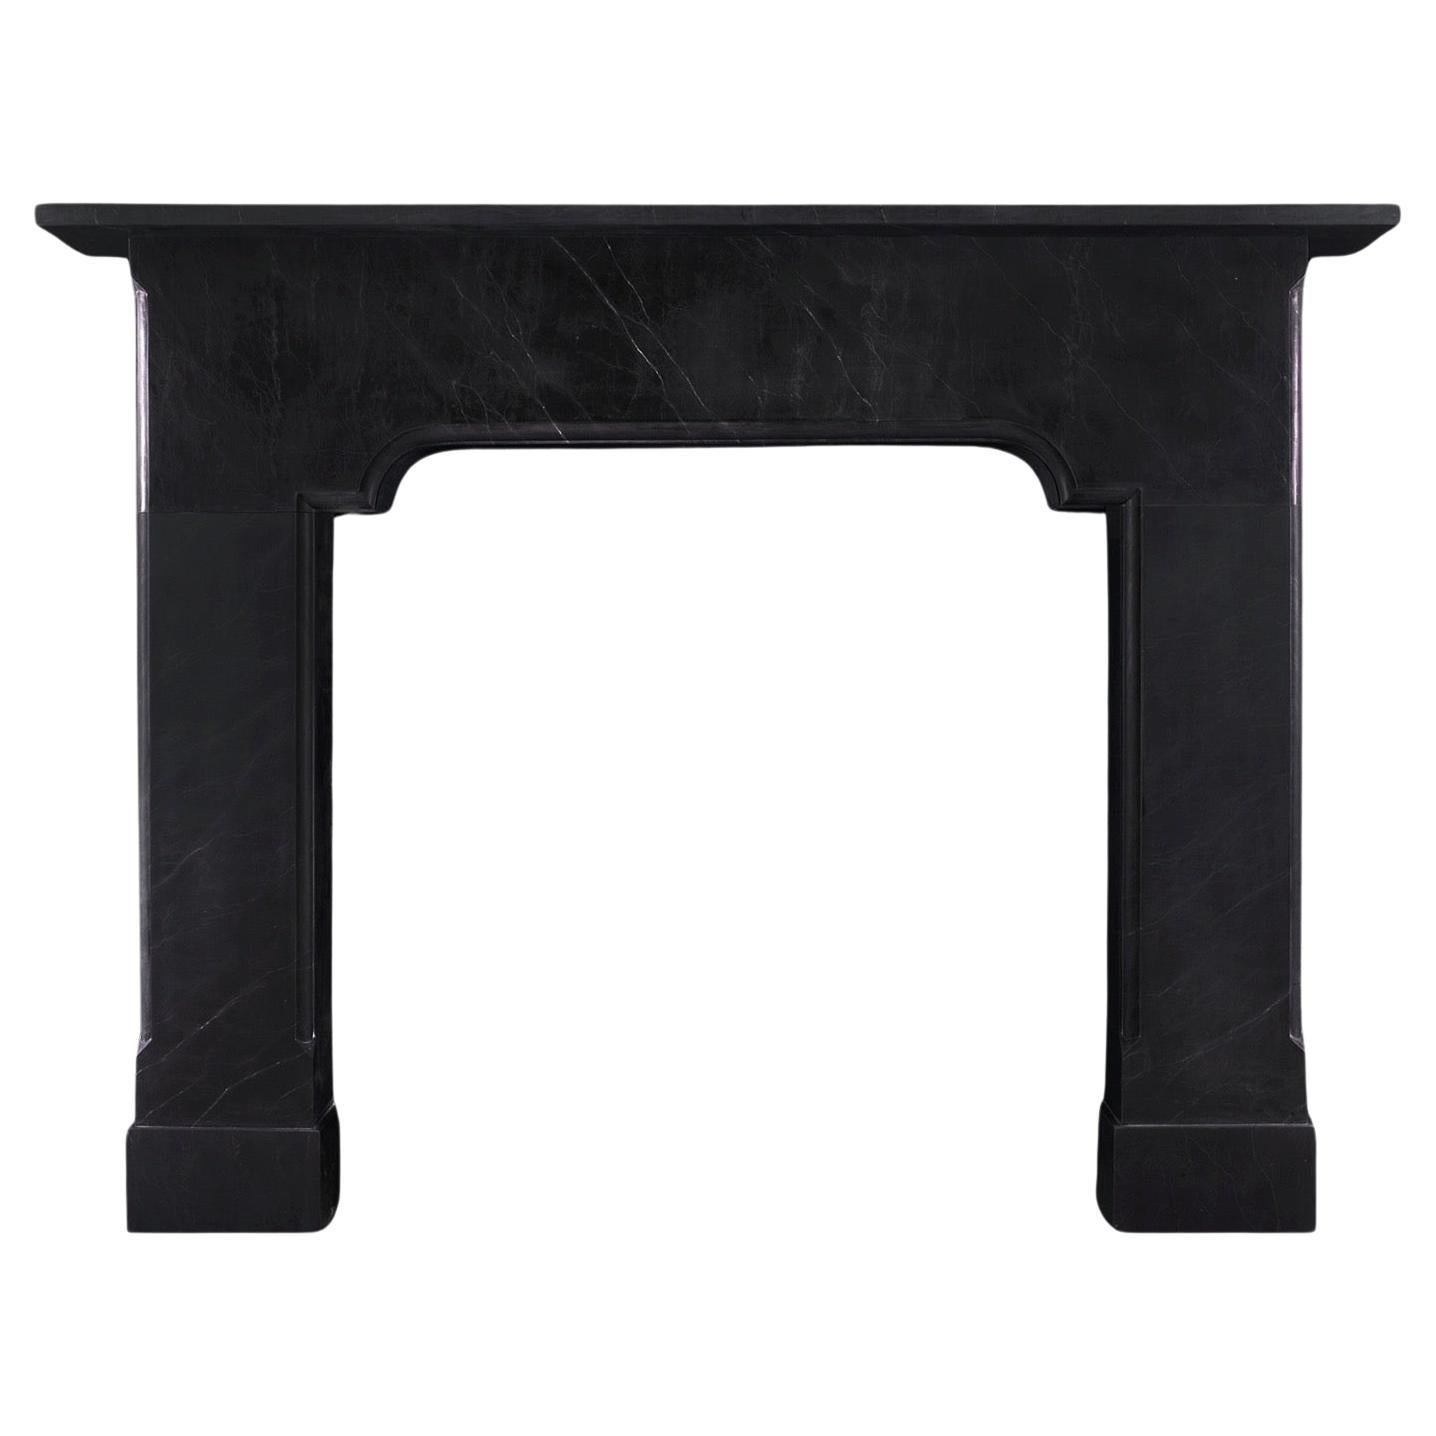 An Imposing Architectural Black Marble Fireplace  For Sale